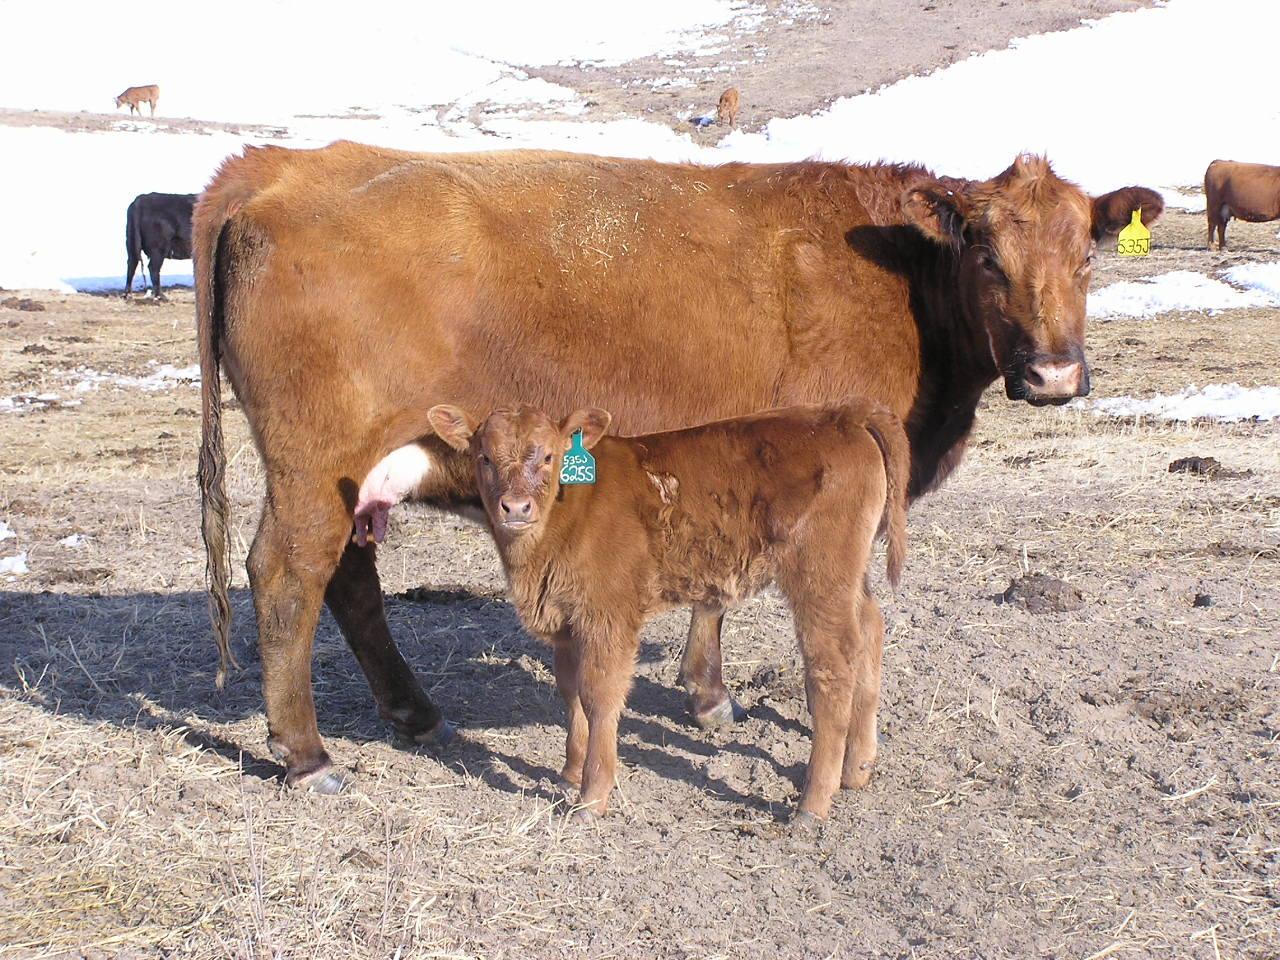 Having a plan and preparing ahead of time for the calving season can help to minimize calf loss, increasing the percent calf crop at weaning.  Photo courtesy of Aaron Berger.